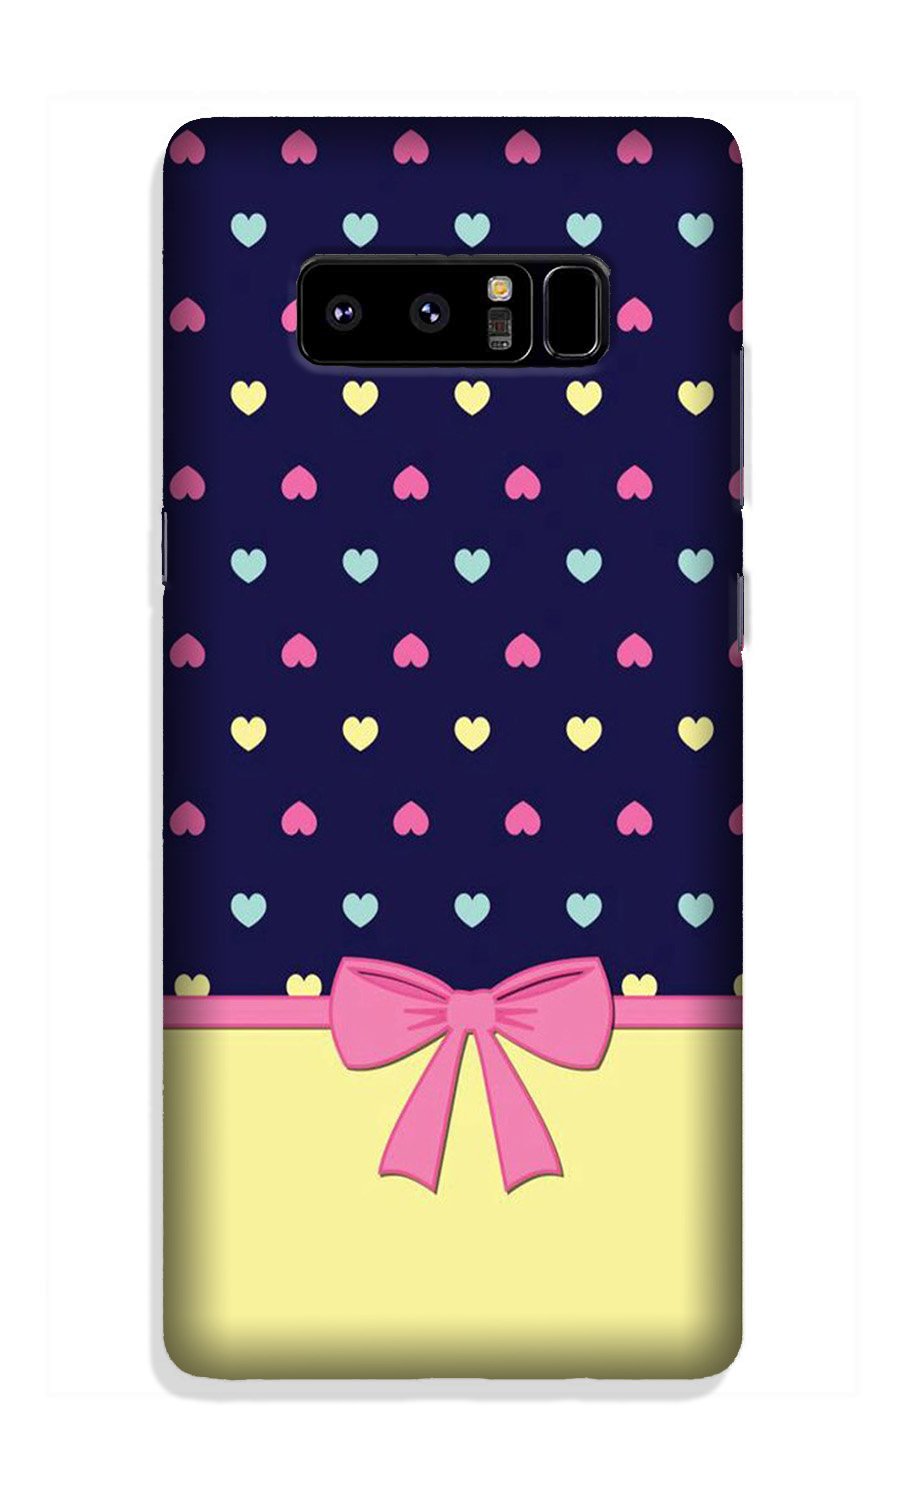 Gift Wrap5 Case for Galaxy Note 8